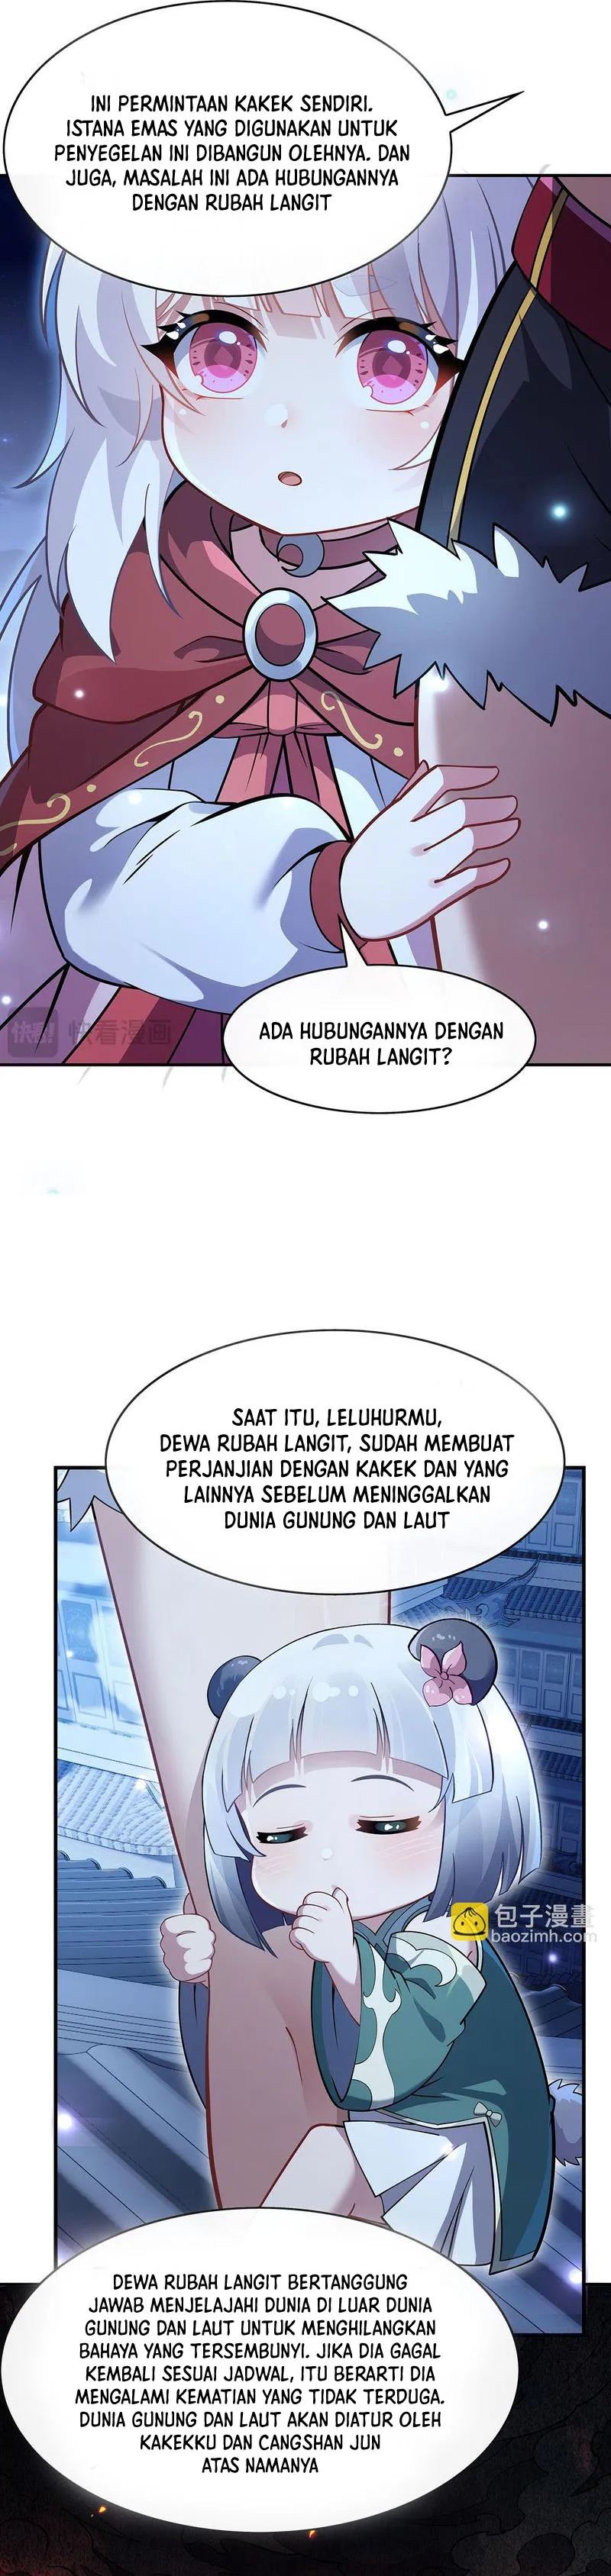 Dilarang COPAS - situs resmi www.mangacanblog.com - Komik my female apprentices are all big shots from the future 230 - chapter 230 231 Indonesia my female apprentices are all big shots from the future 230 - chapter 230 Terbaru 1|Baca Manga Komik Indonesia|Mangacan